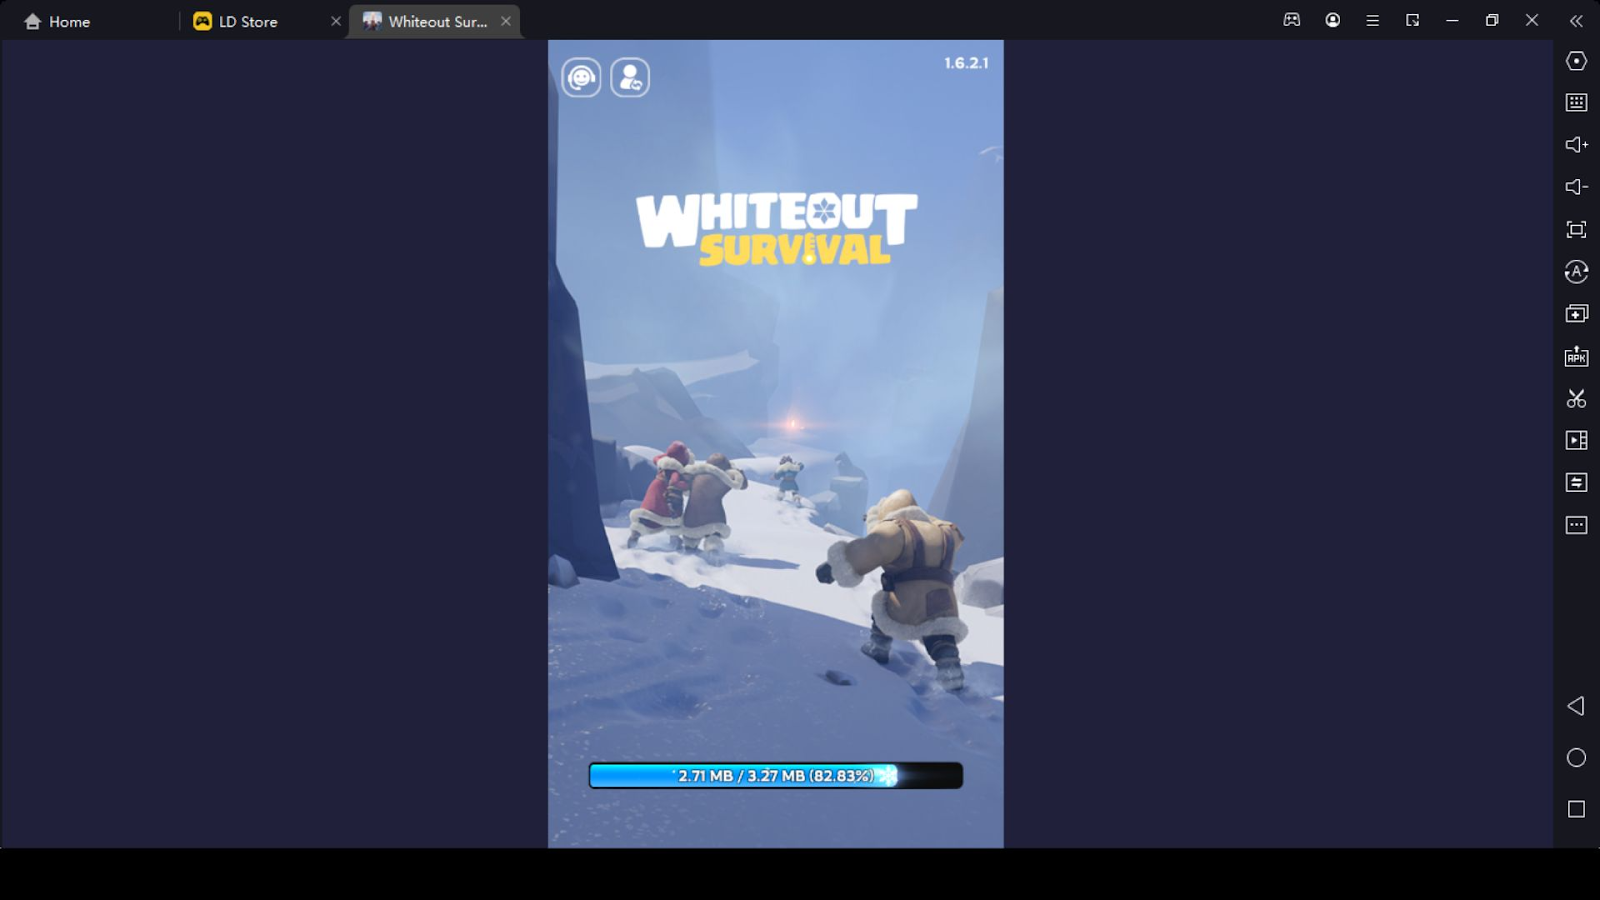 How to Level Up in Whiteout Survival The Best TipsGame GuidesLDPlayer